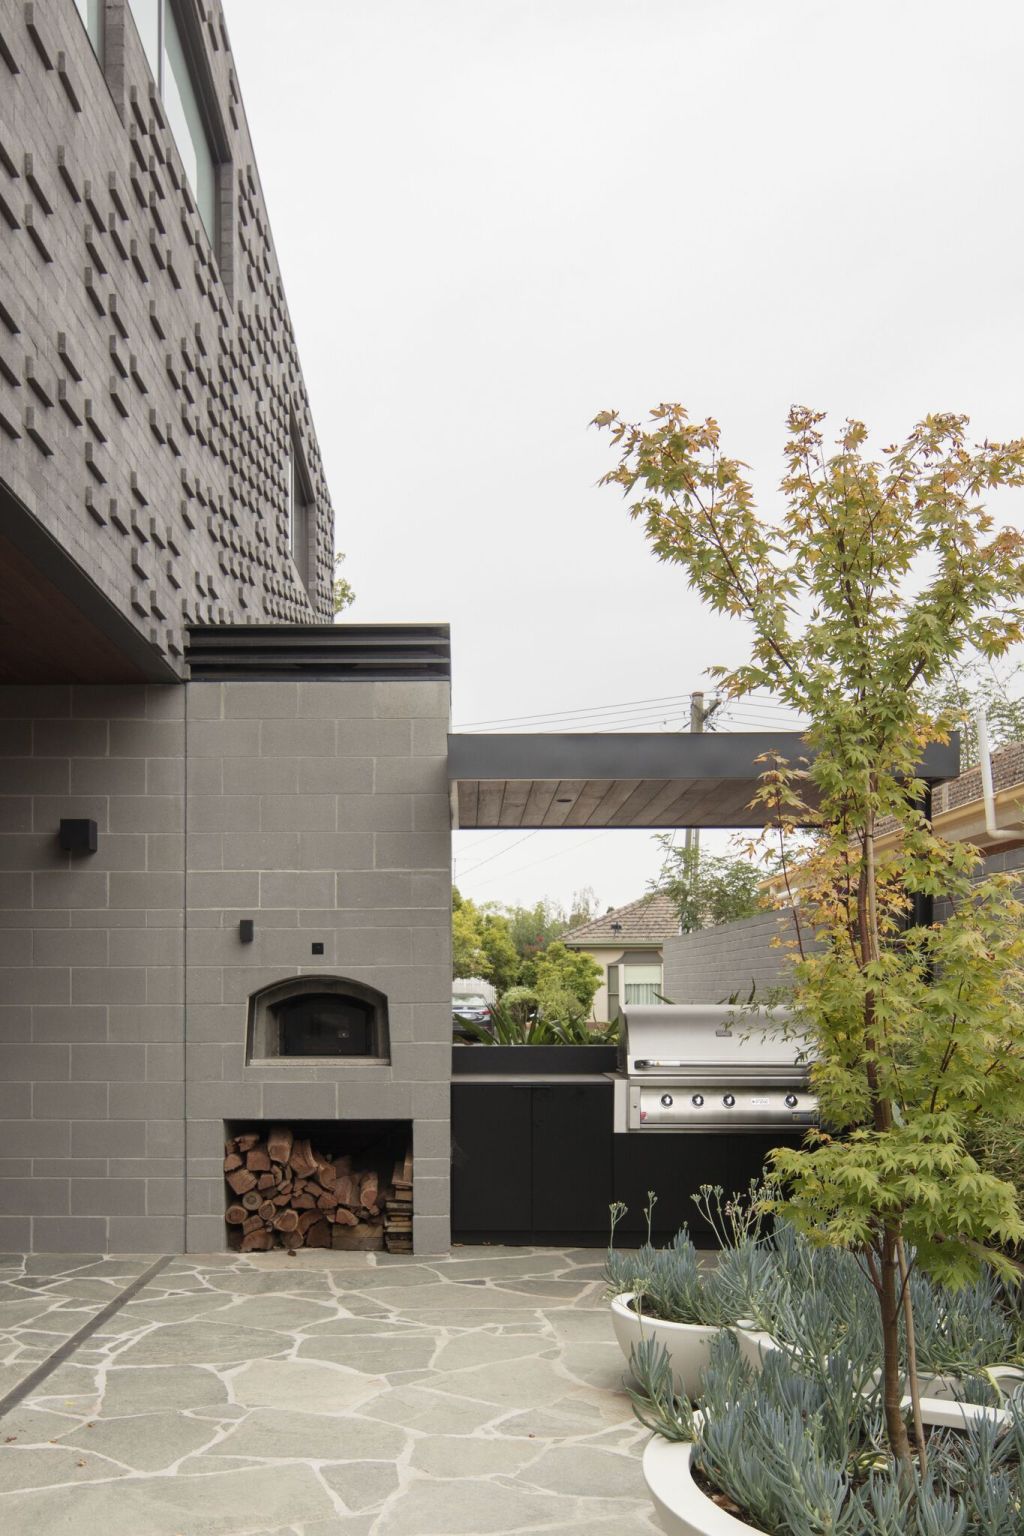 The outdoor barbecue area with pizza oven. Photo: Ben Hosking